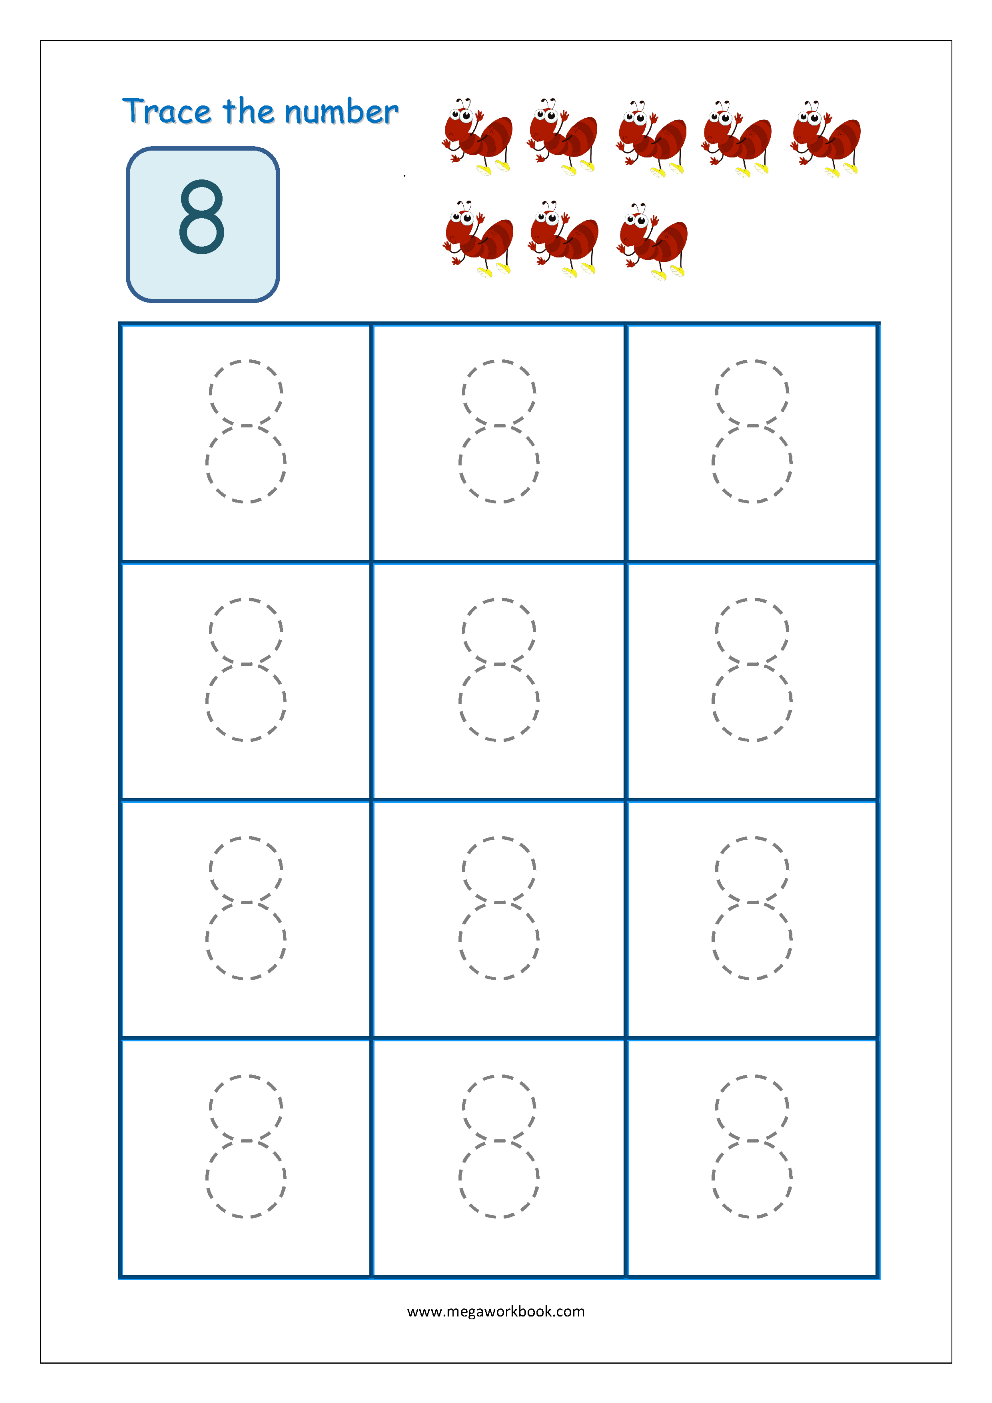 number-tracing-tracing-numbers-number-tracing-worksheets-tracing-numbers-1-to-10-number